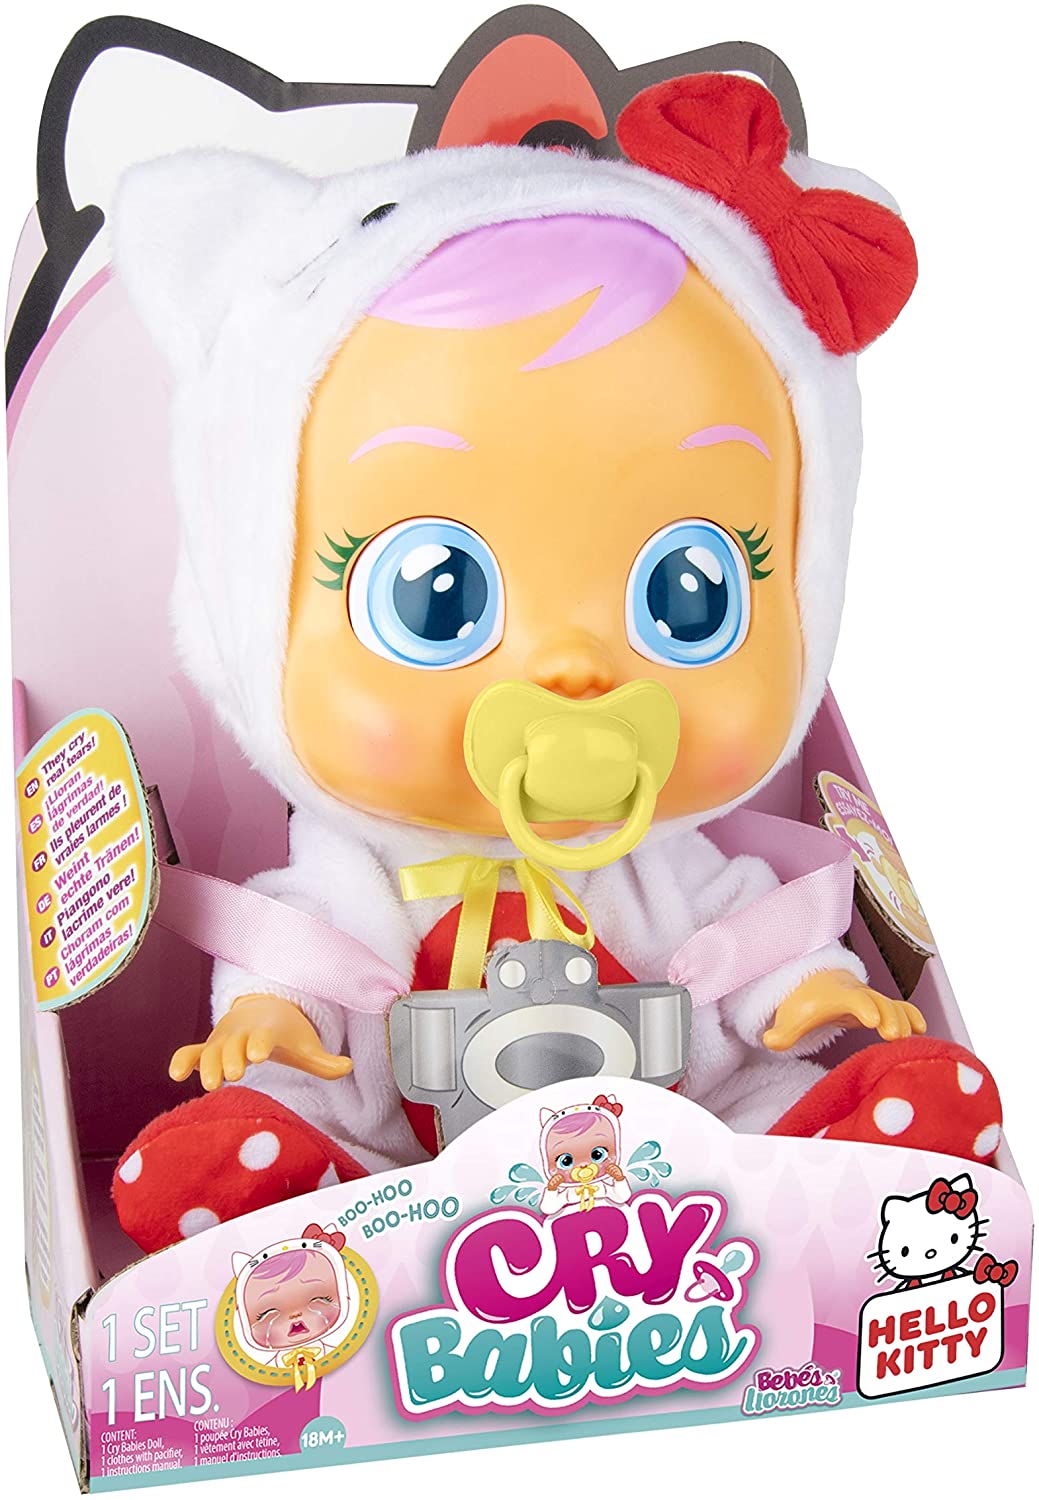  CRY  BABIES  HELLO  KITTY  80133 Toyland Store